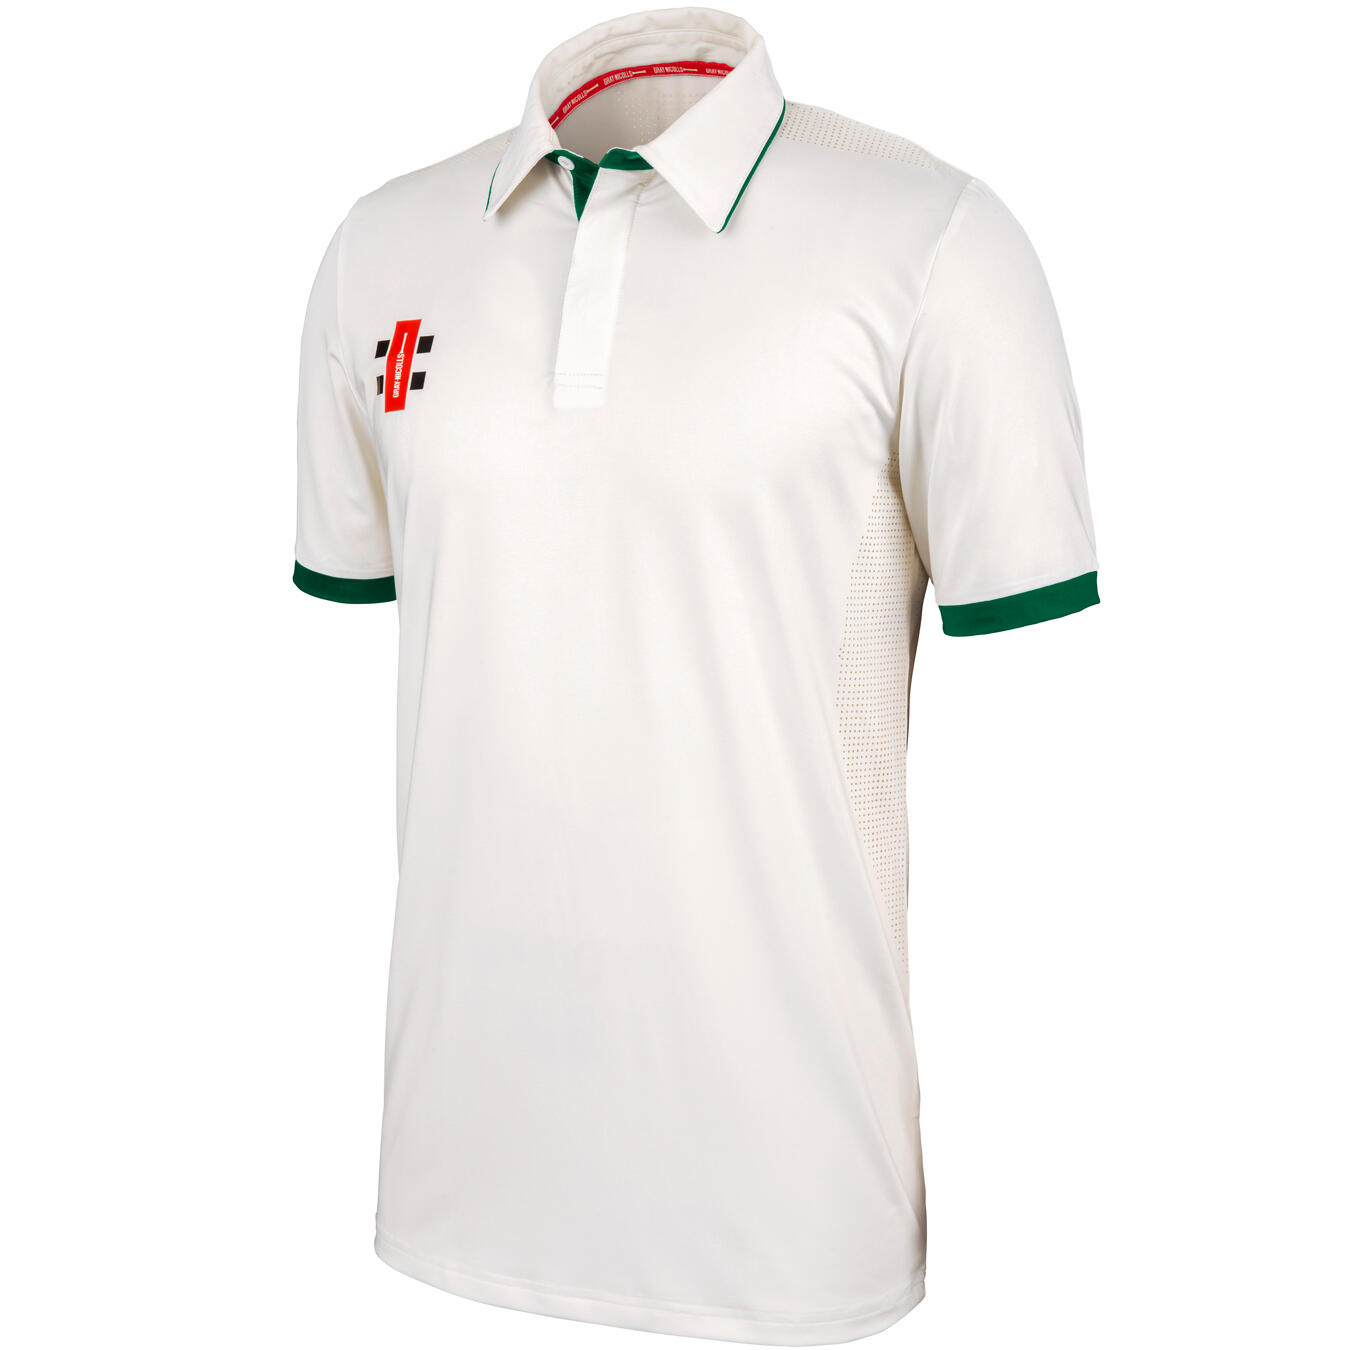 Pro Performance S/S Playing Shirt,Ivory/Green,Adult 1/3